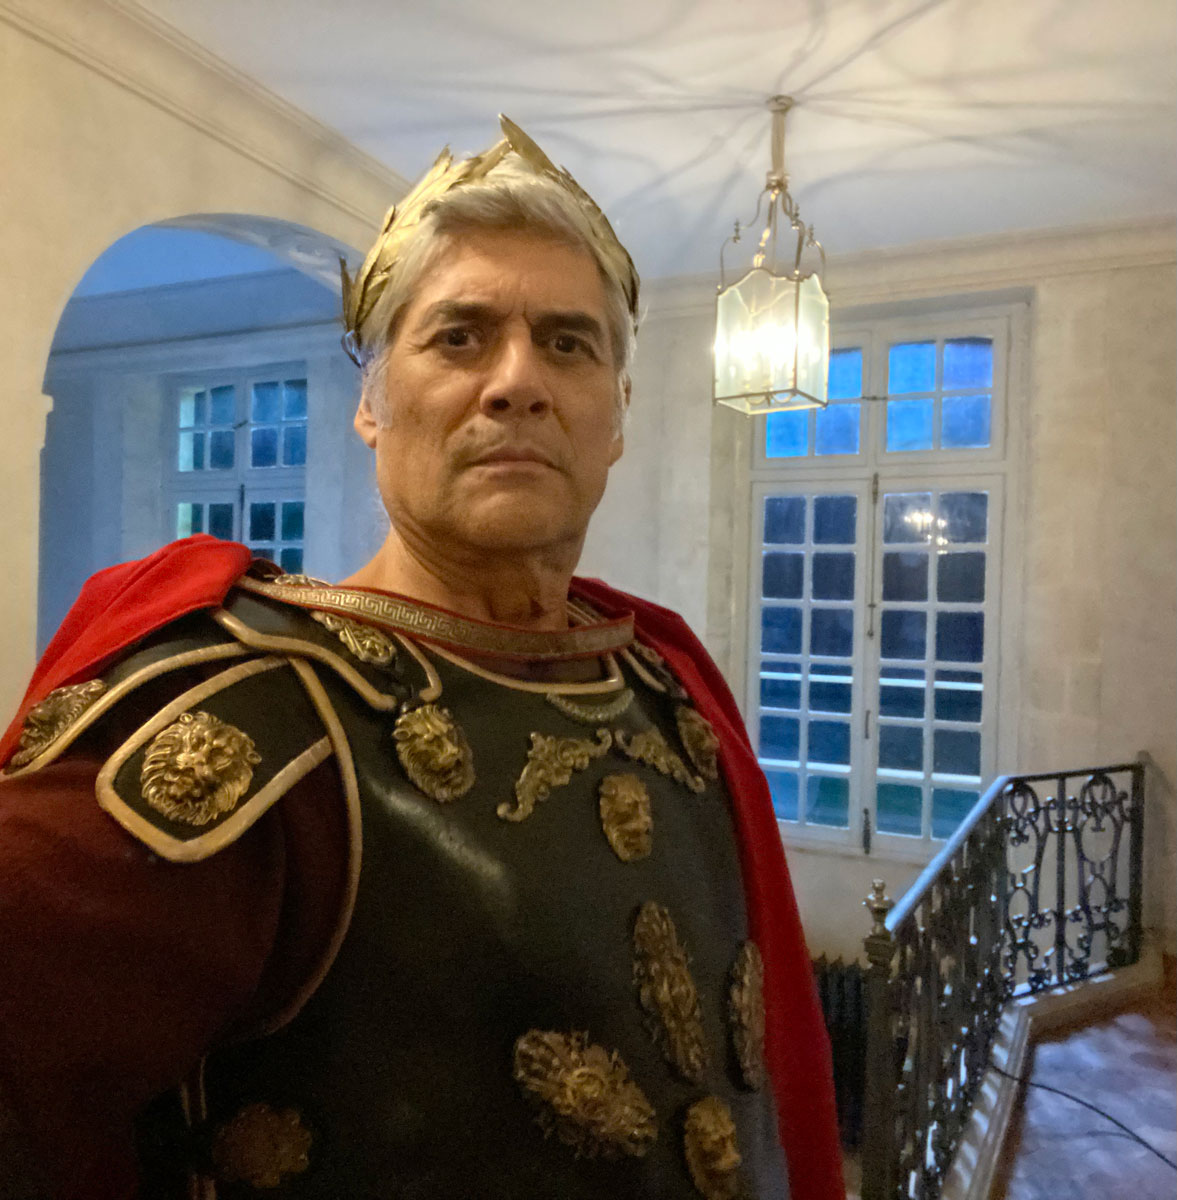 "Super-héros Malgré Lui" (Super hero despite himelf): Georges as Alain Belmont during a costume party for his character